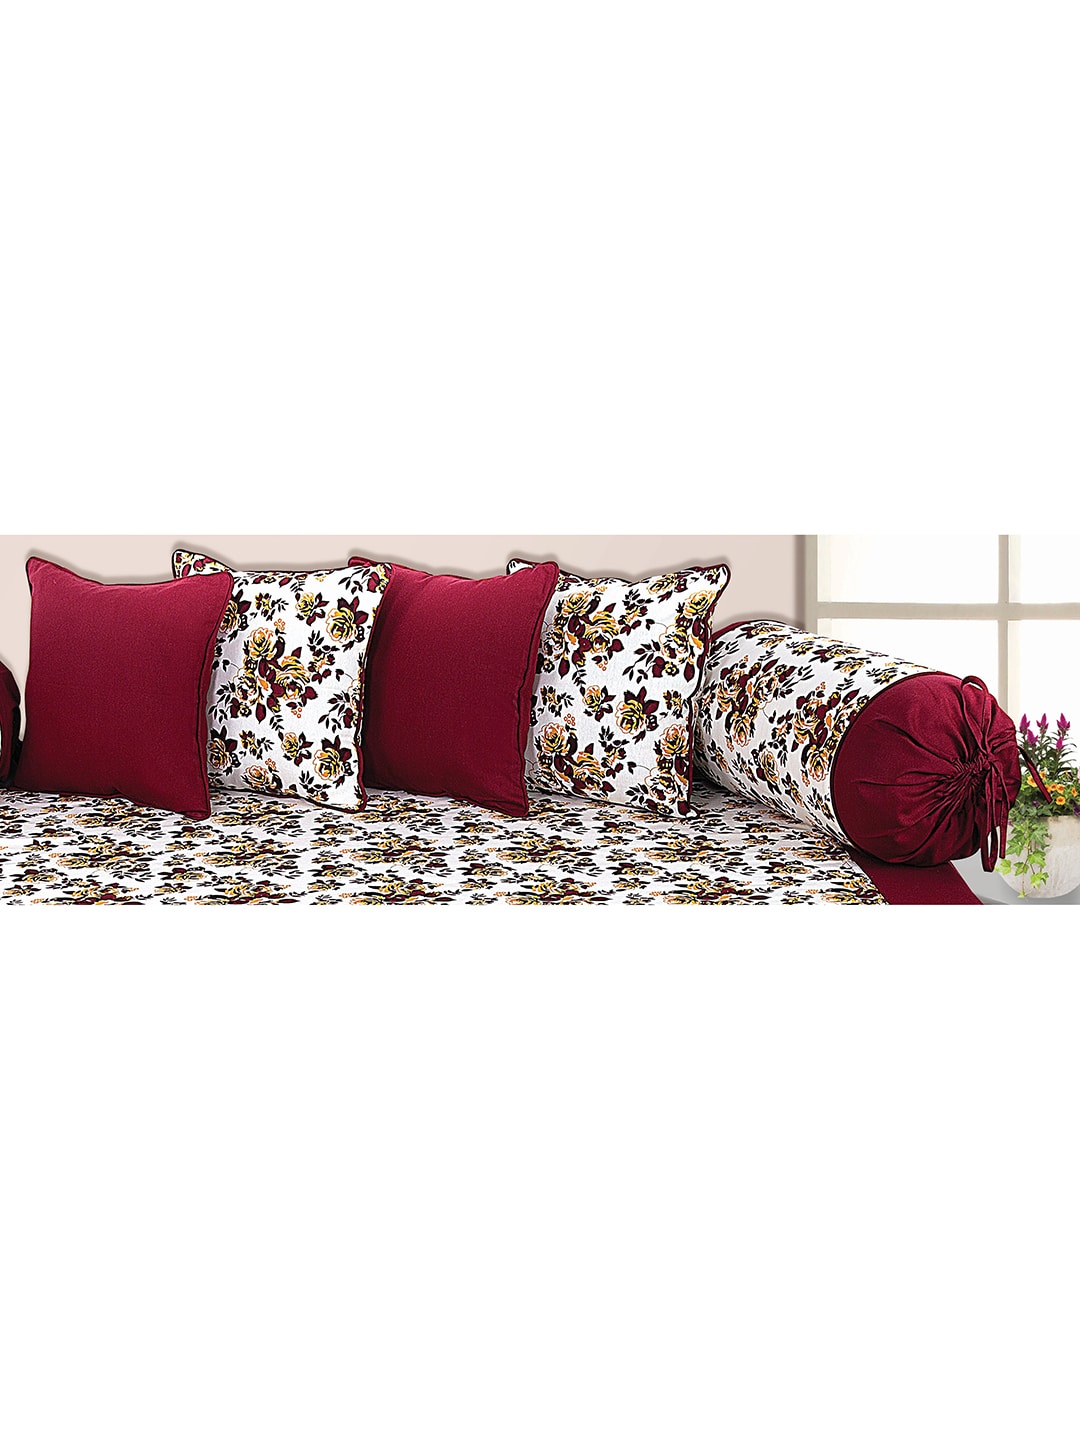 SHADES of LIFE Set Of 6 Maroon Printed Diwan Set With Bolsters & Cushions Price in India